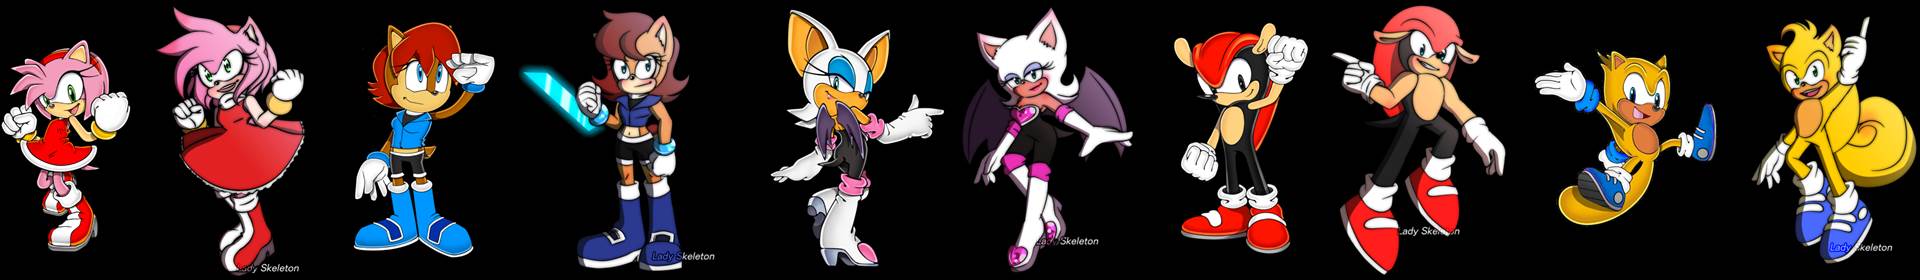 Amy, Sally, Rouge, Mighty and Ray differences.png  by shwapneel1999